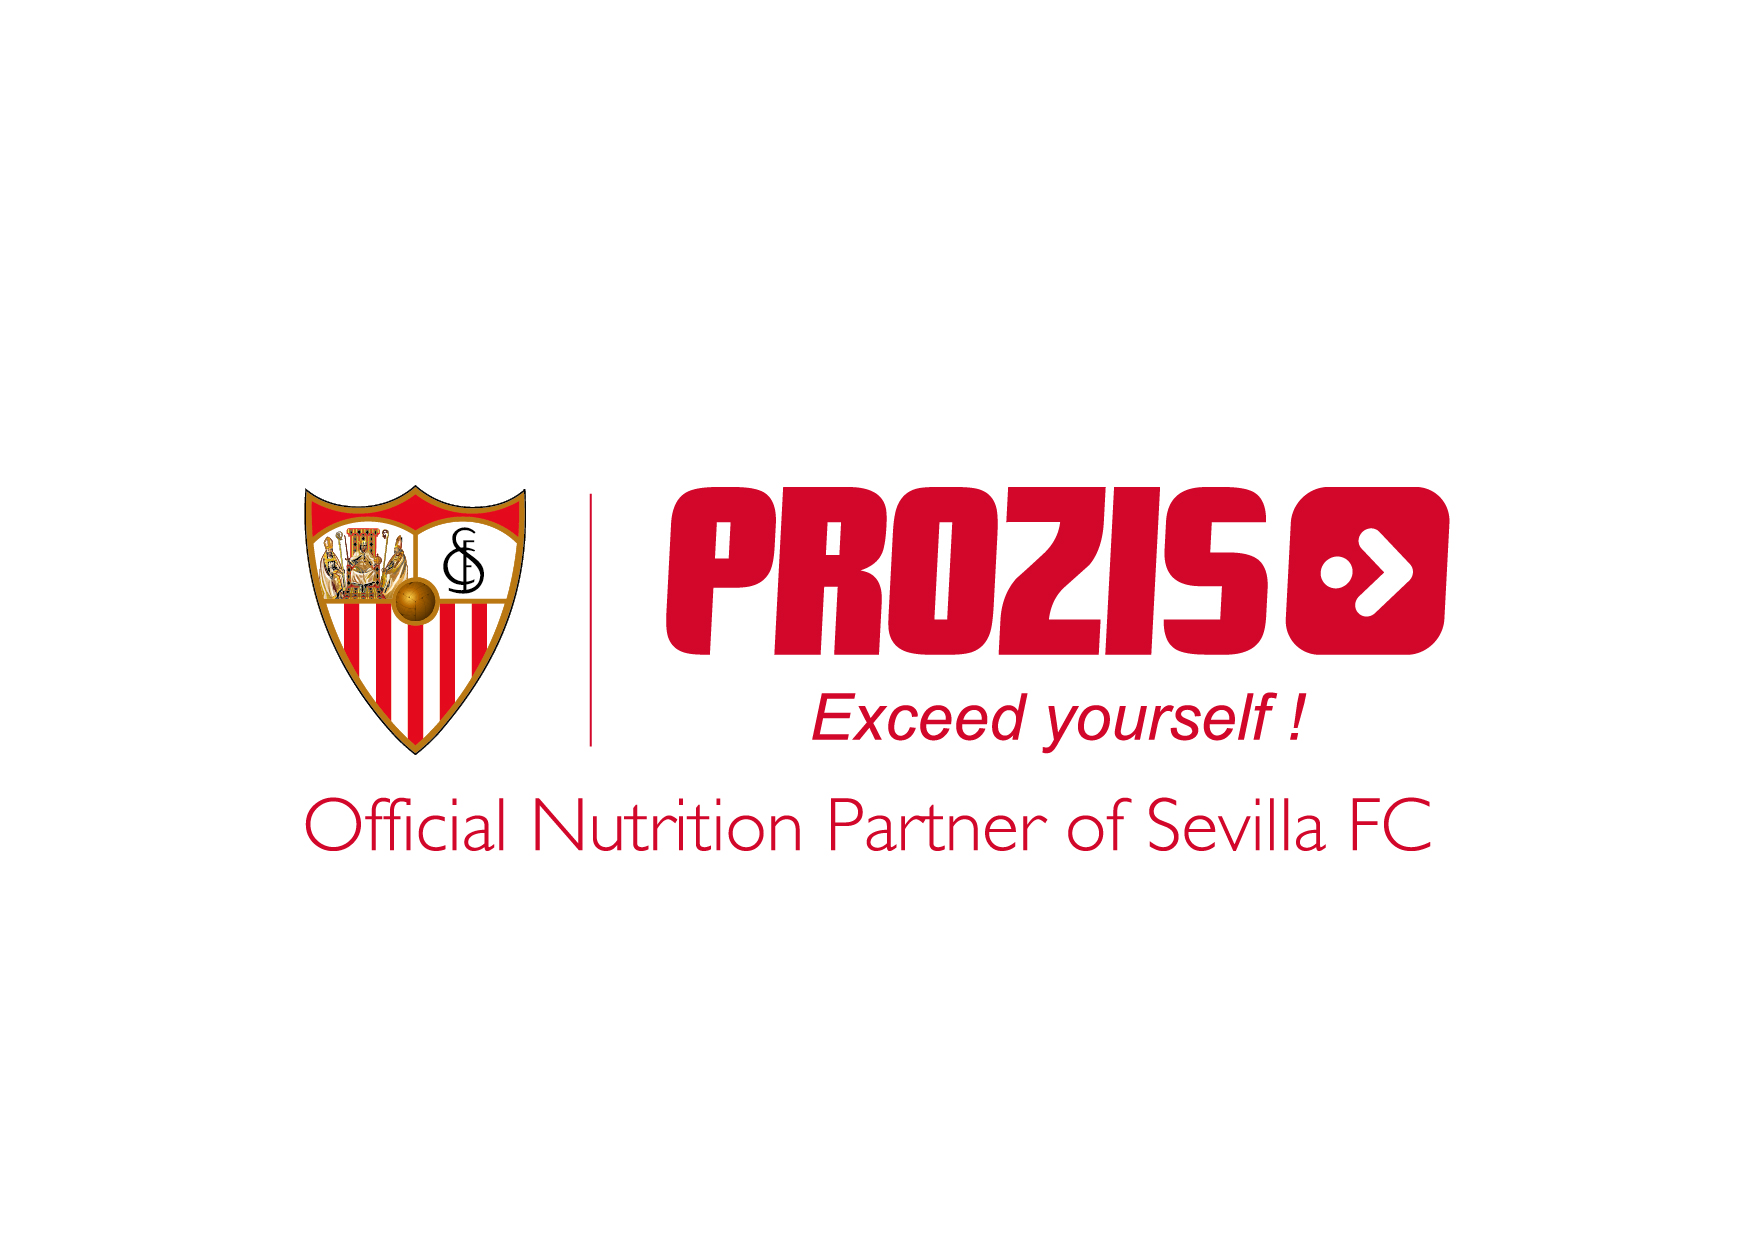 PROZIS IS THE NEW OFFICIAL NUTRITION PARTNER OF SEVILLA FC